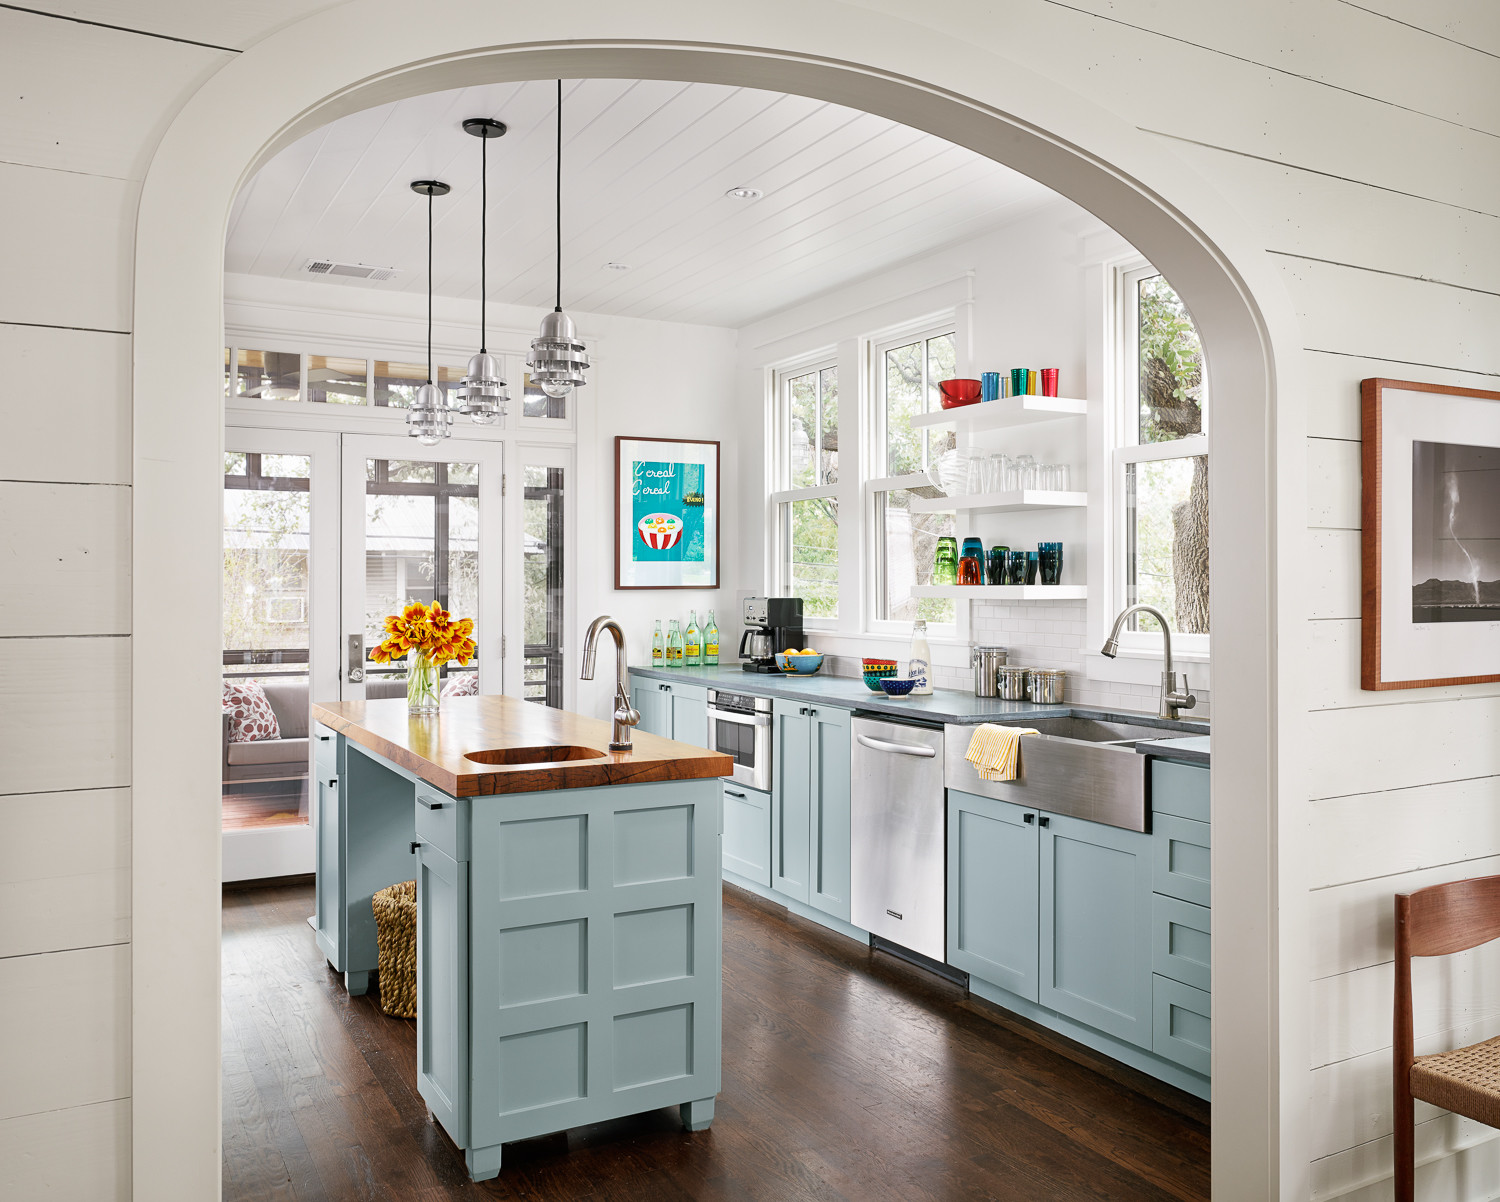 This Galley Kitchen With An Island Combines White Heron Oc 57 By Benjamin Moore And White Oak Wood Flooring For A Farmhouse Vibe 